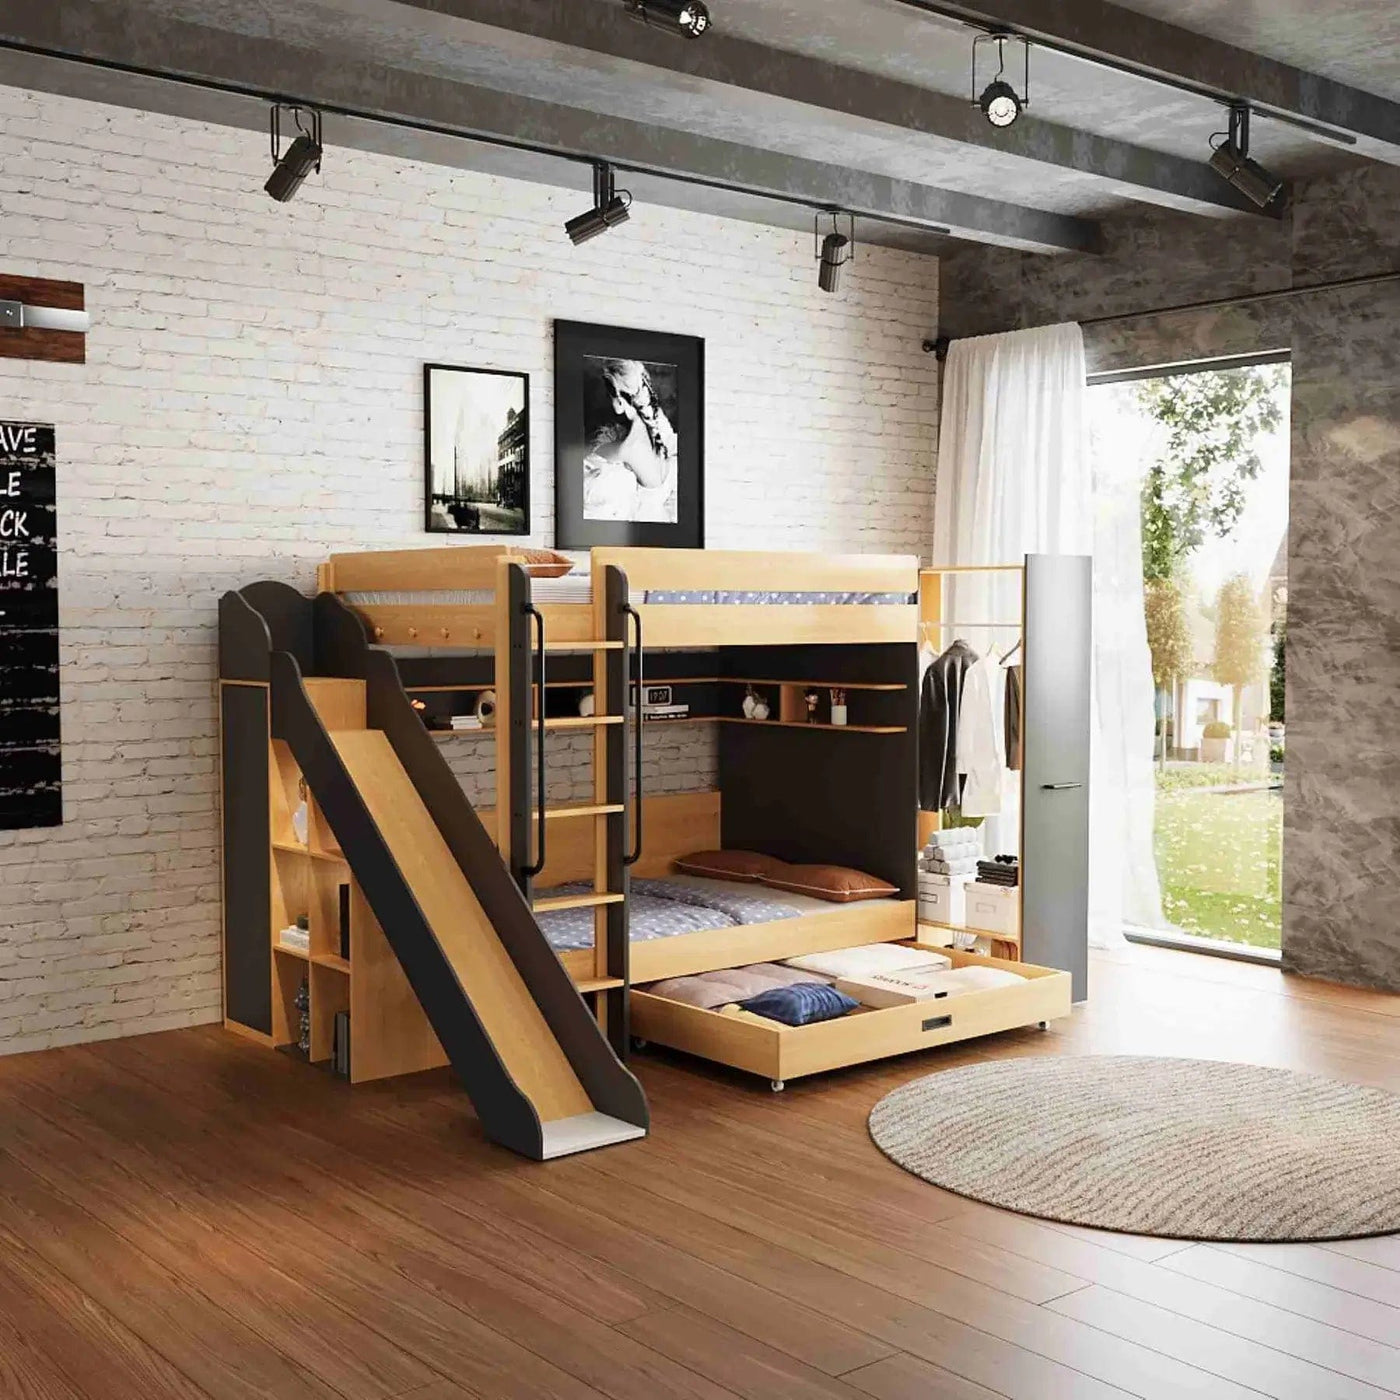 TEOM_Bunk_Bed_Stylish_Space_saving_bunk_bed_EzSpace-with-stair_and_sliding_wardrobe